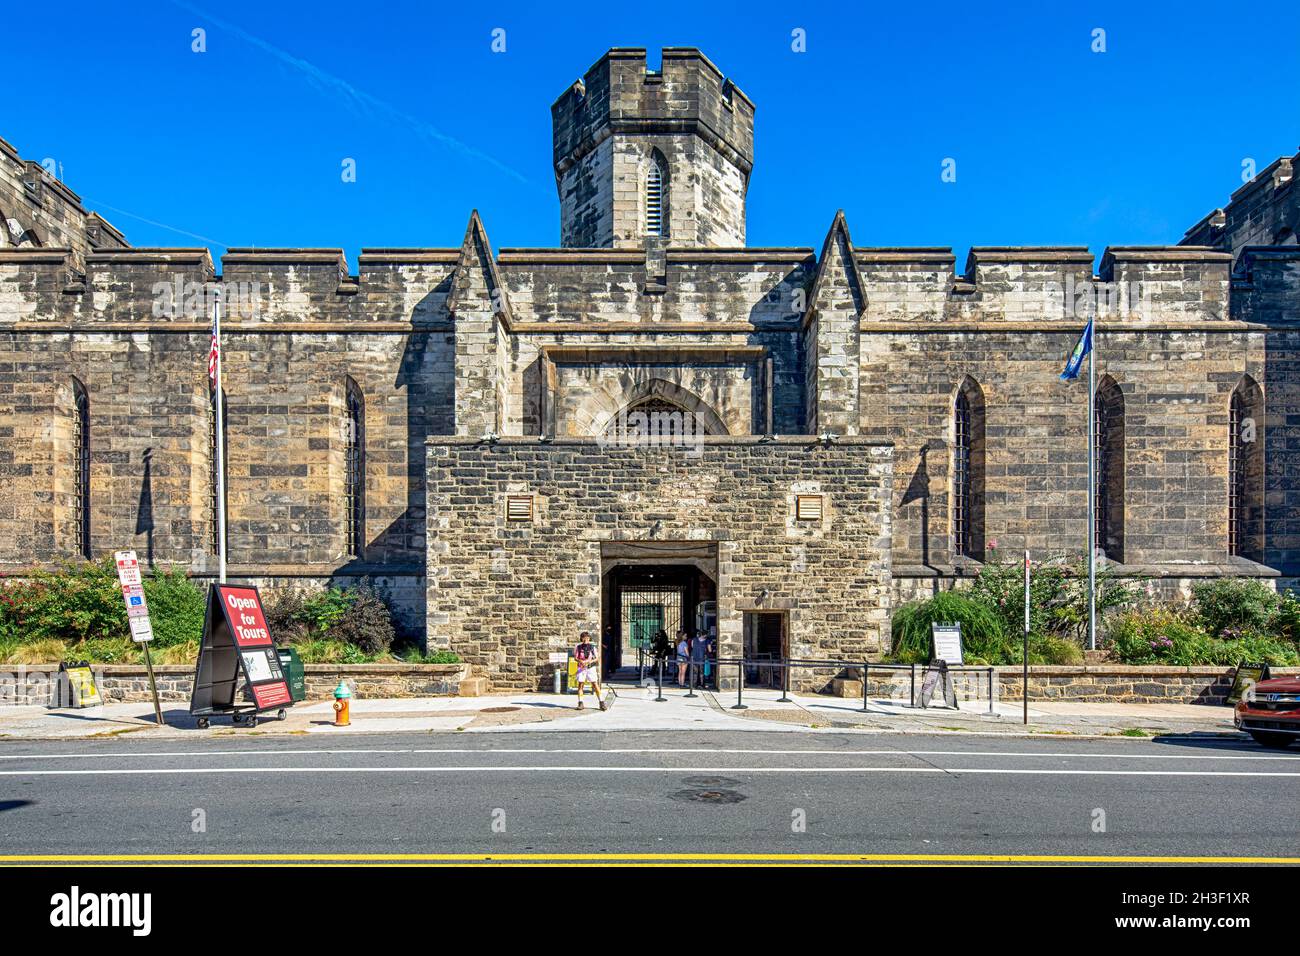 2027 Fairmount Avenue, Eastern State Penitentiary. Now a 'preserved ruin' and museum, the Philadelphia landmark was once thought a model prison. Stock Photo